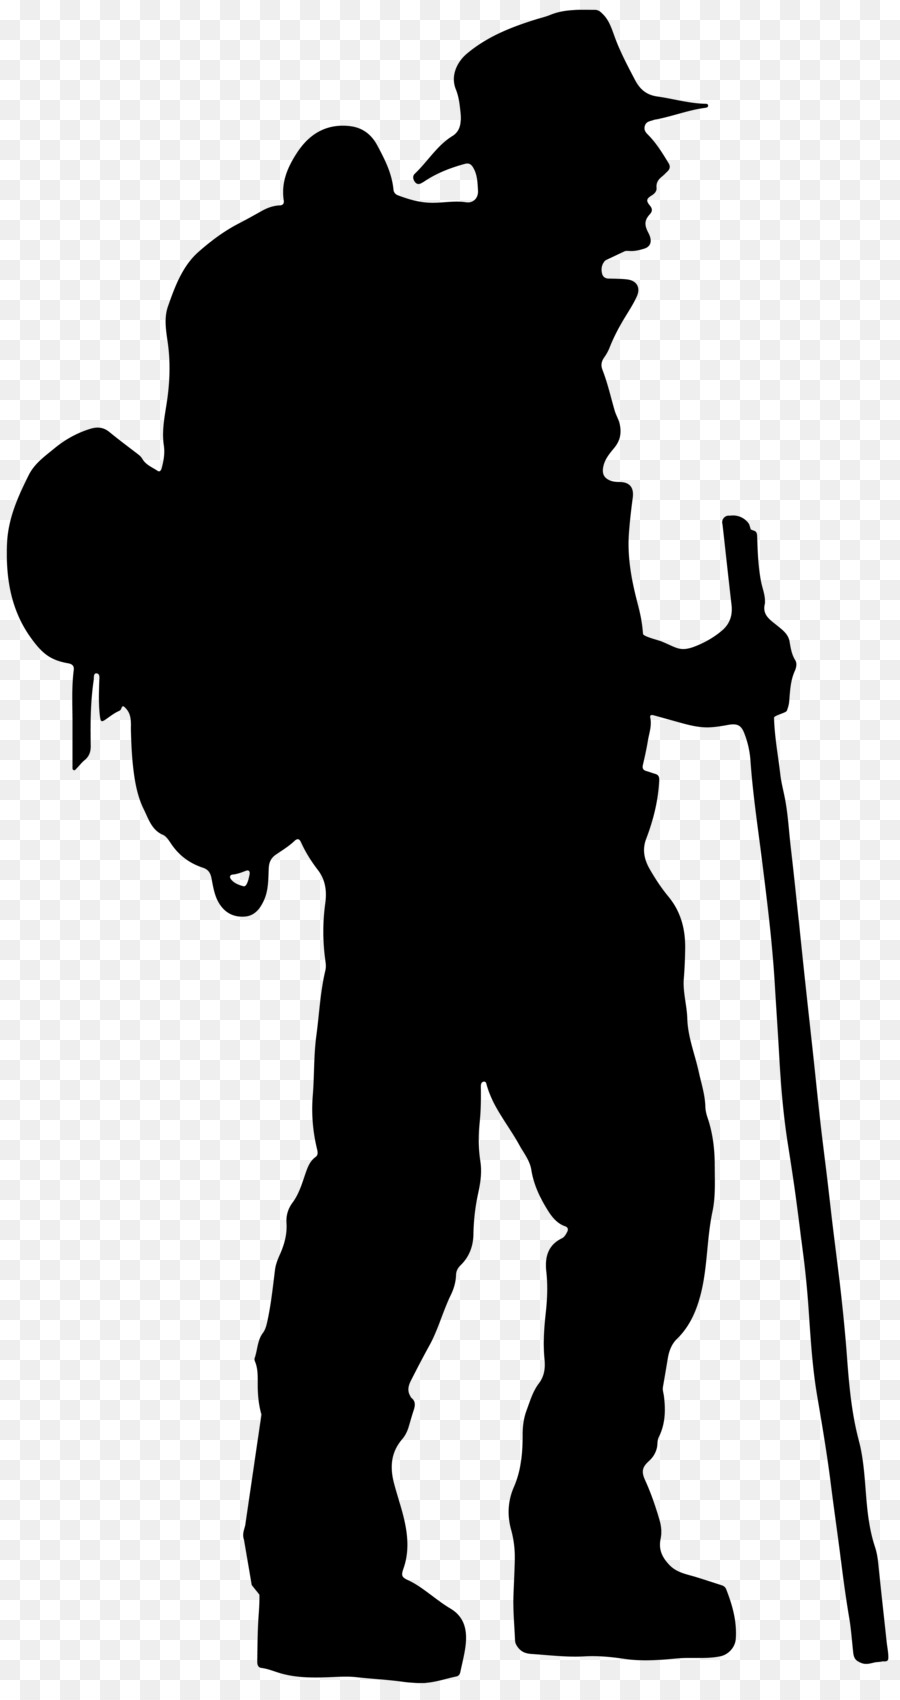 Silhouette Climbing Clip art - Silhouette png download - 4255*8000 - Free Transparent Silhouette png Download.